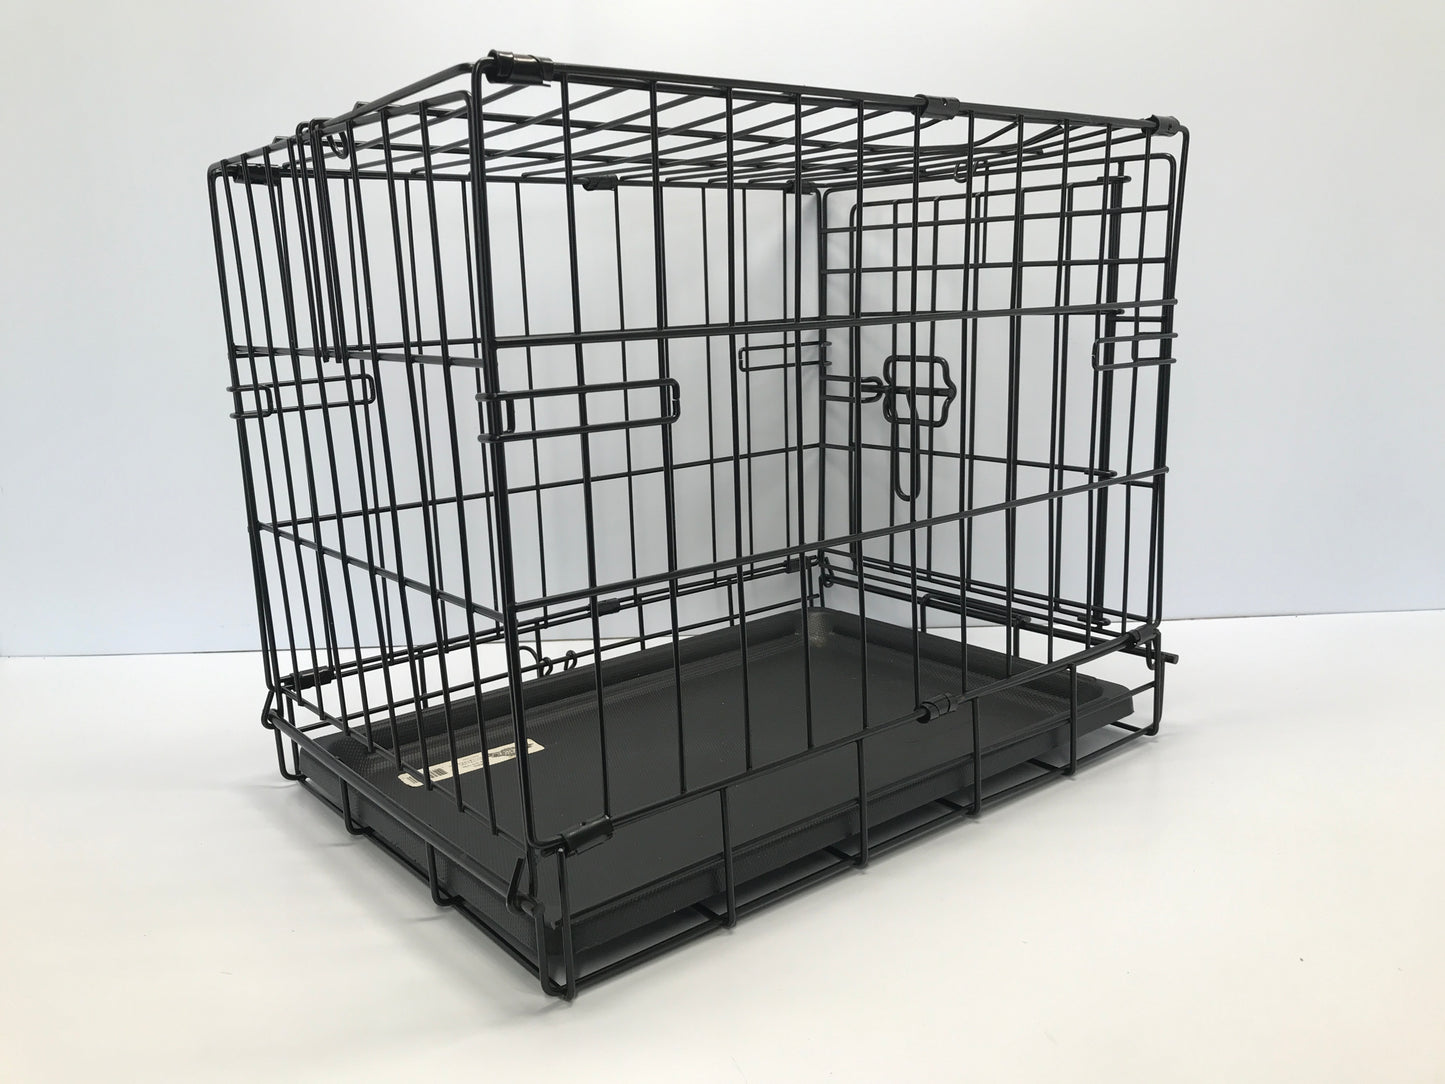 Dog Puppy Cat Small Folding Metal Crate Kennel 15x17x12 inch With Tray Like New